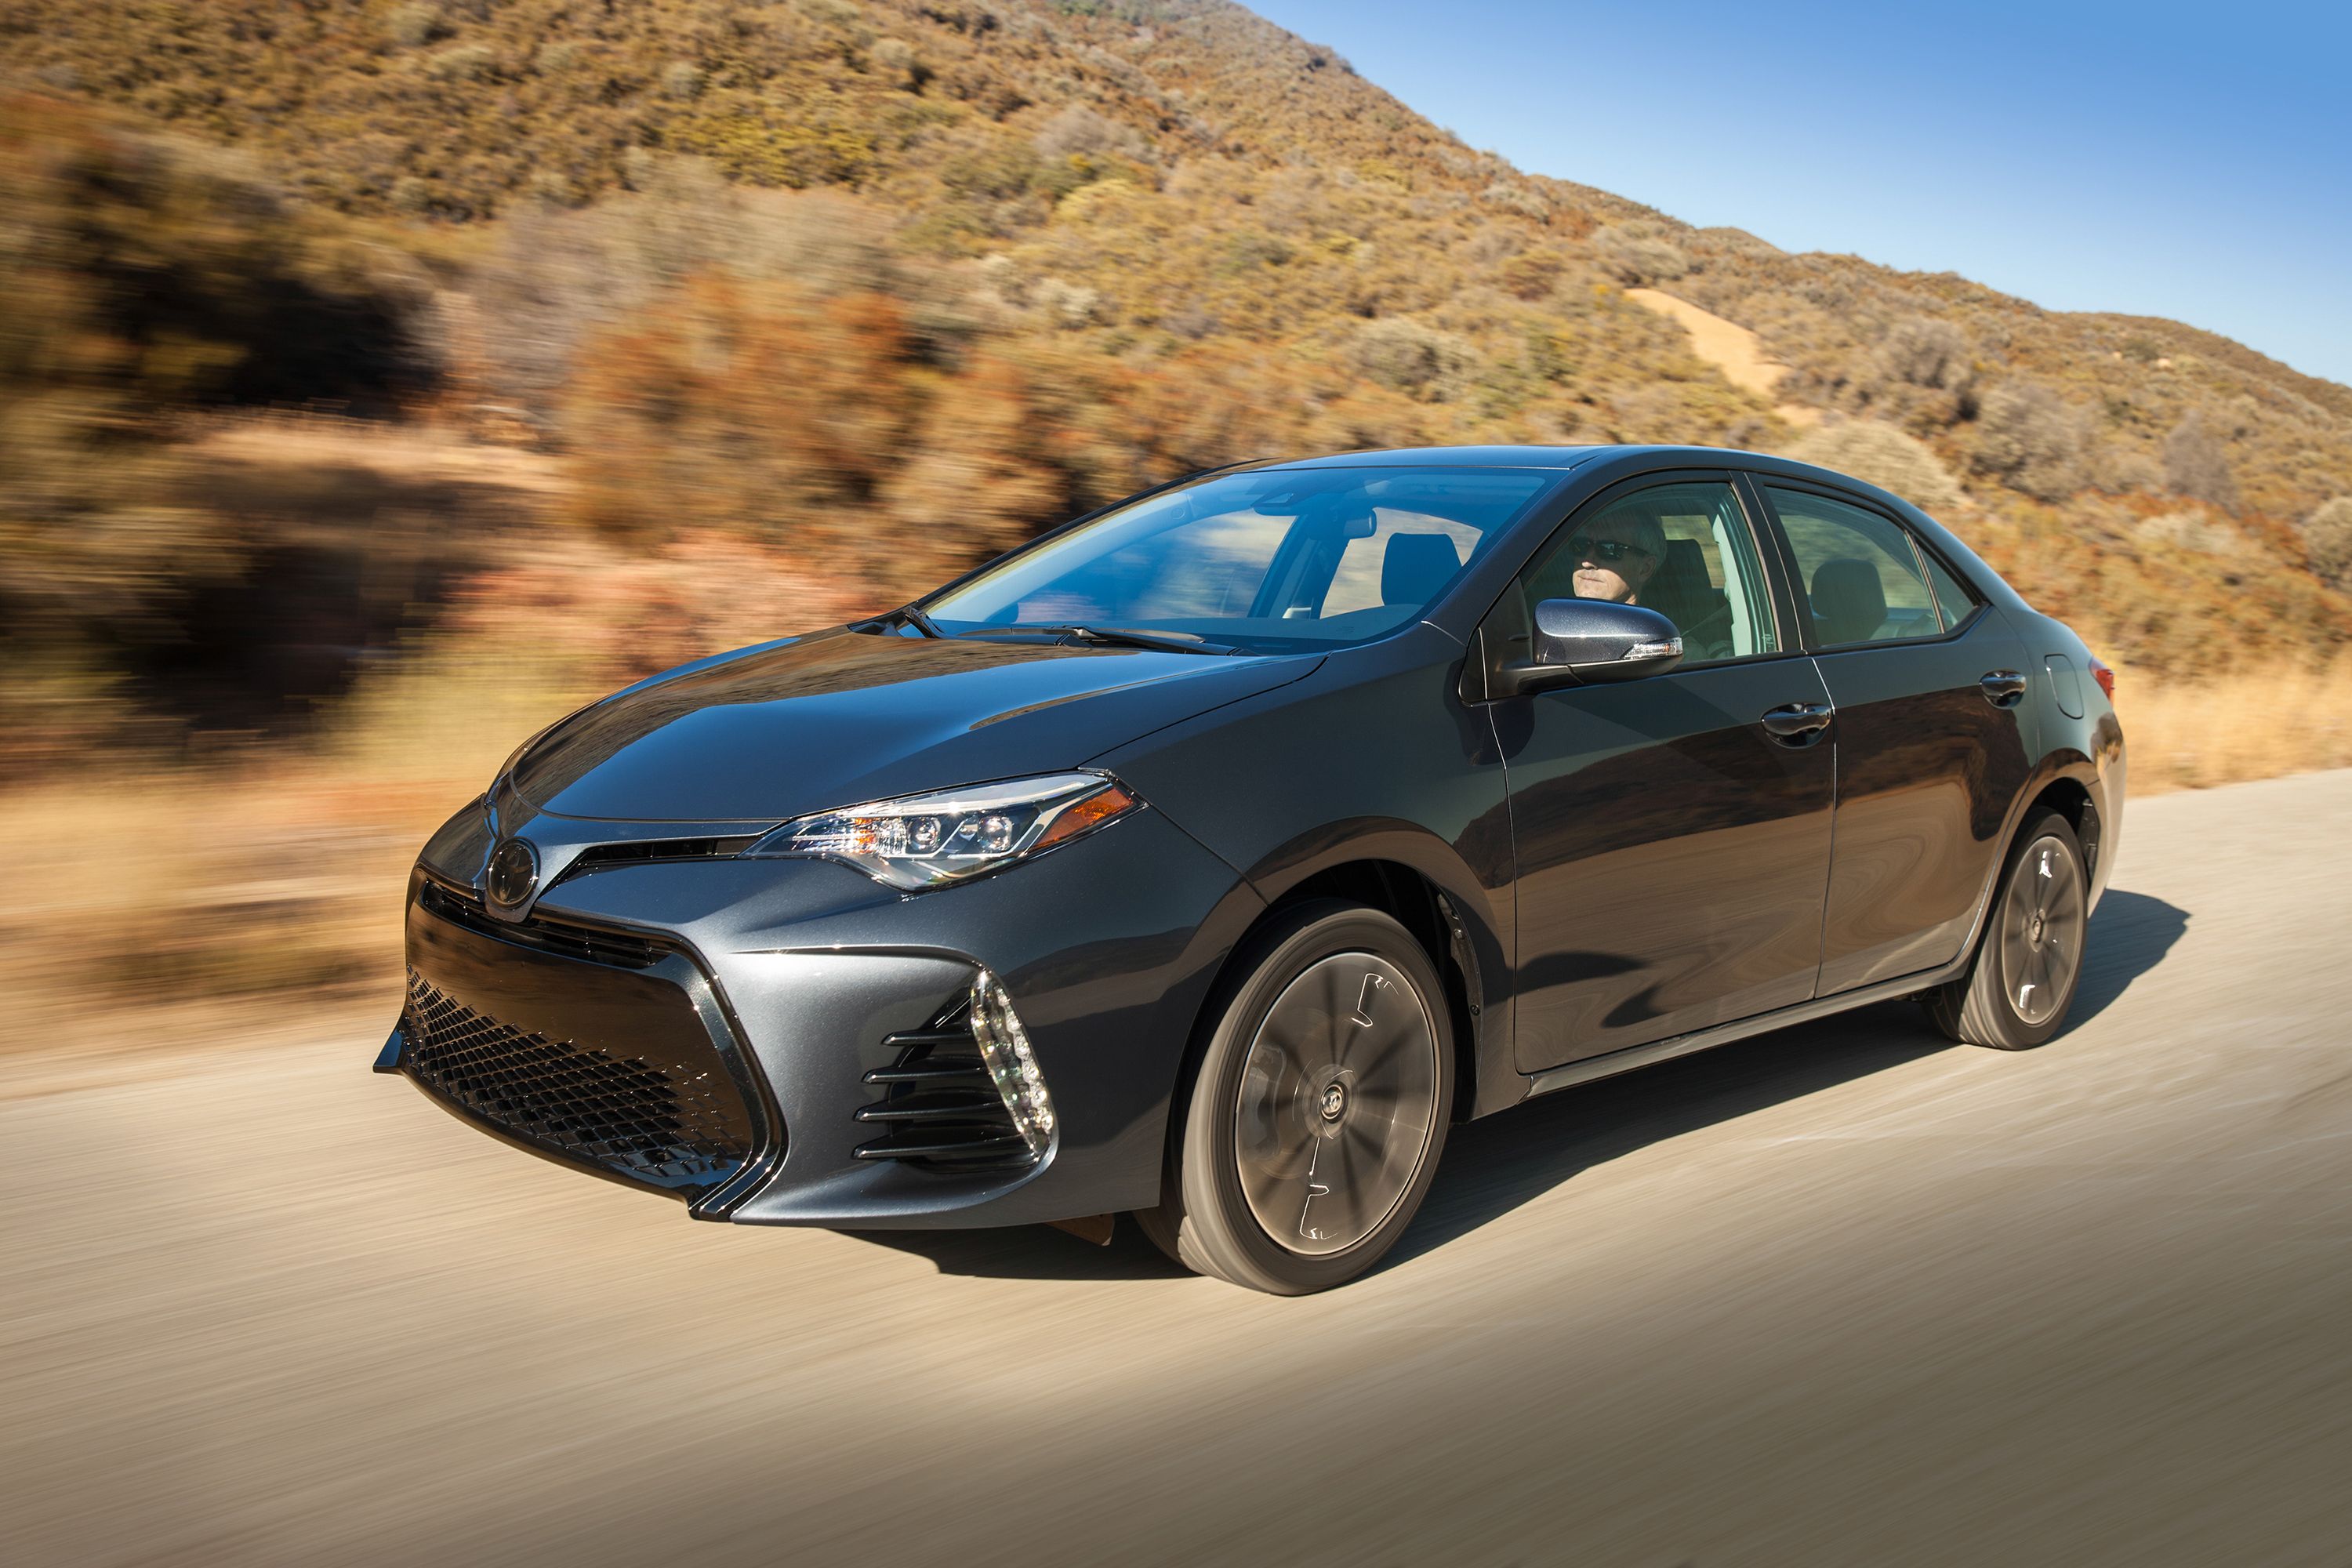 2017 Toyota Corolla – Driving Impression And Review